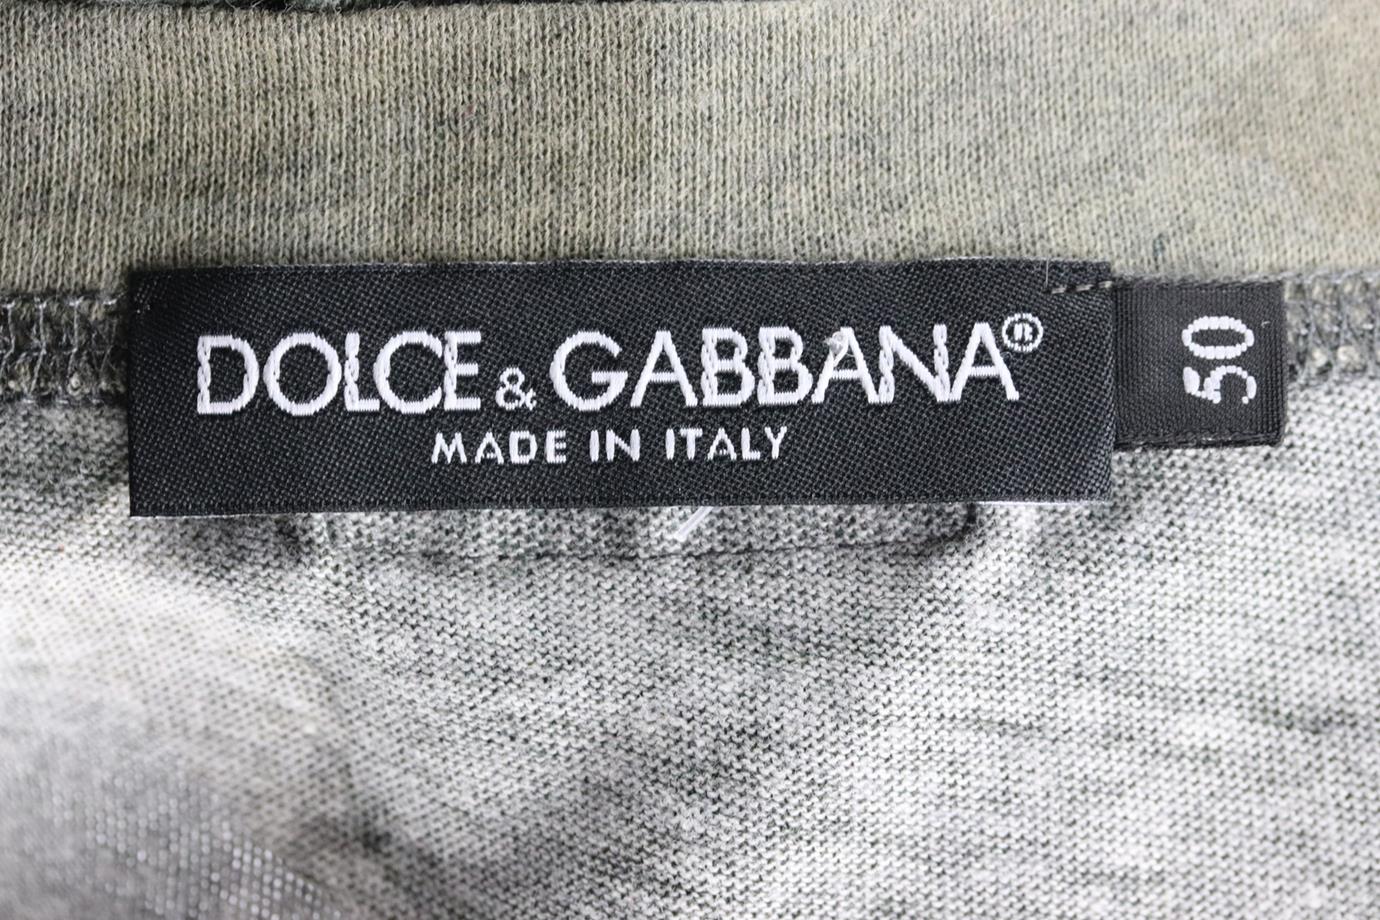 DOLCE AND GABBANA MEN'S CAMOUFLAGE PRINTED COTTON TOP IT 50 UK/US CHEST 40